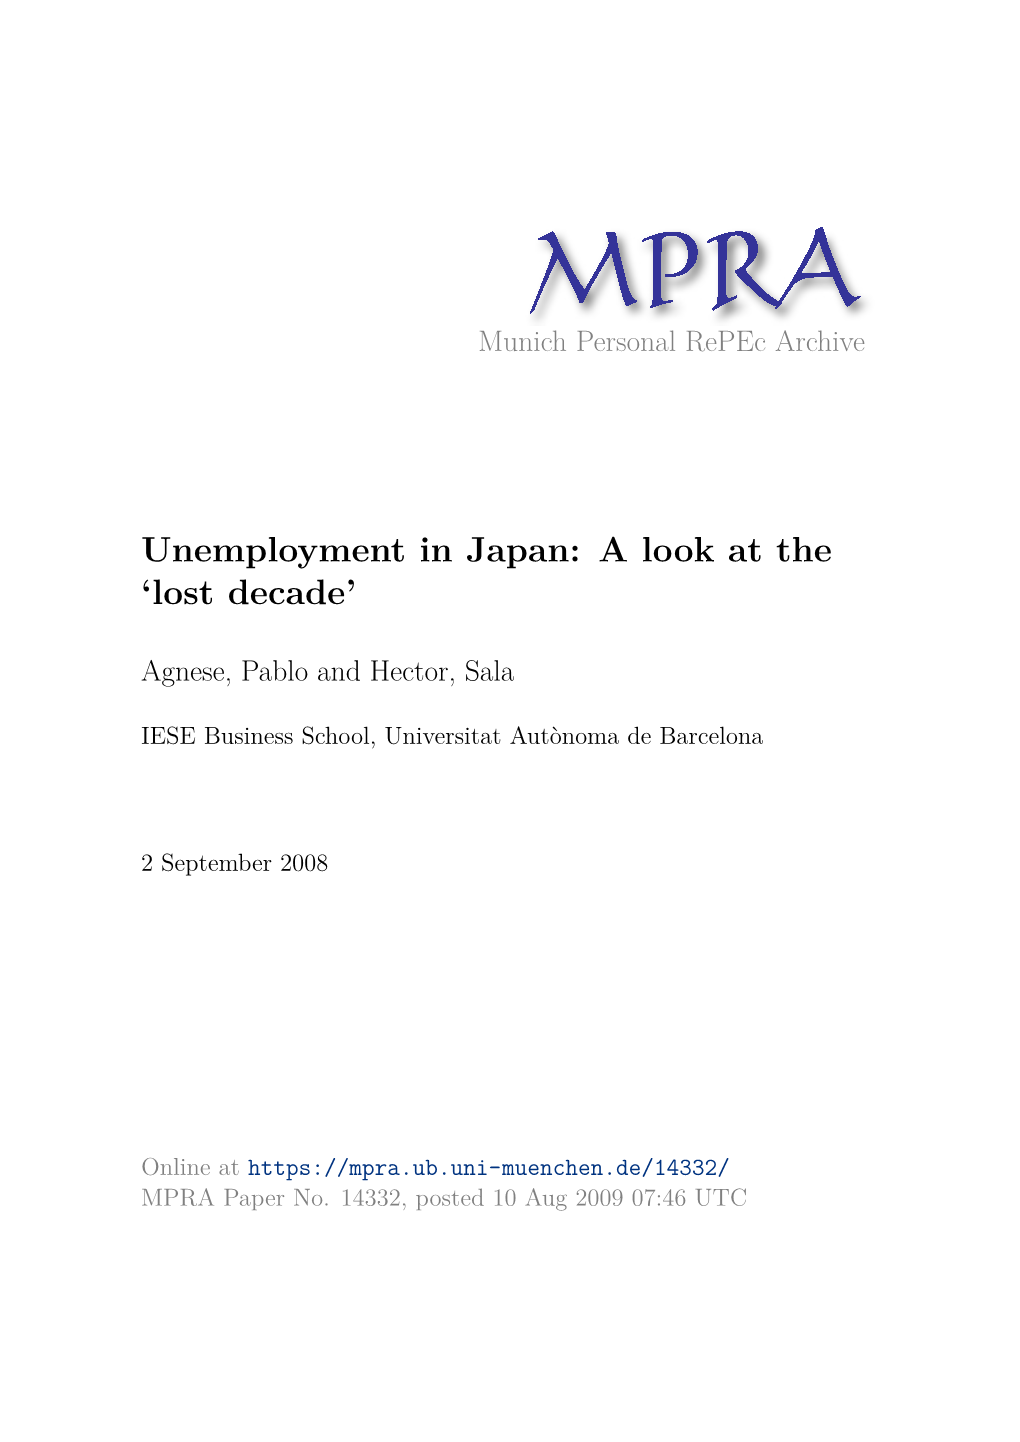 Unemployment in Japan: a Look at the 'Lost Decade'